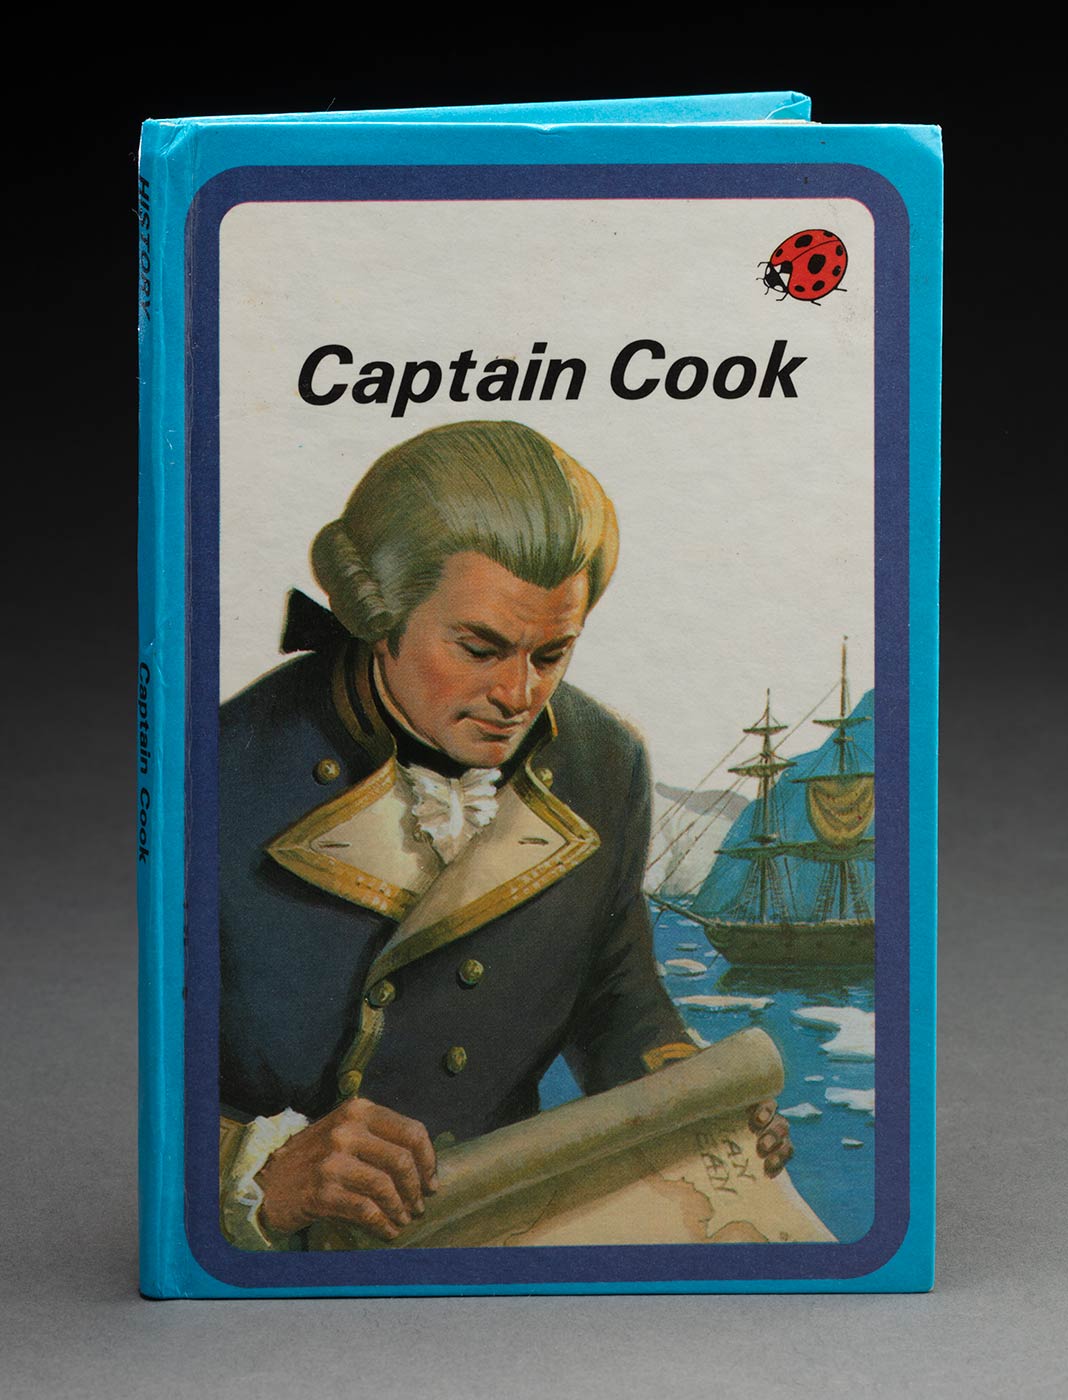 A hard cover book with the title 'Captain Cook'. The cover has a blue boarder and features a drawing of Captain Cook holding a map. - click to view larger image